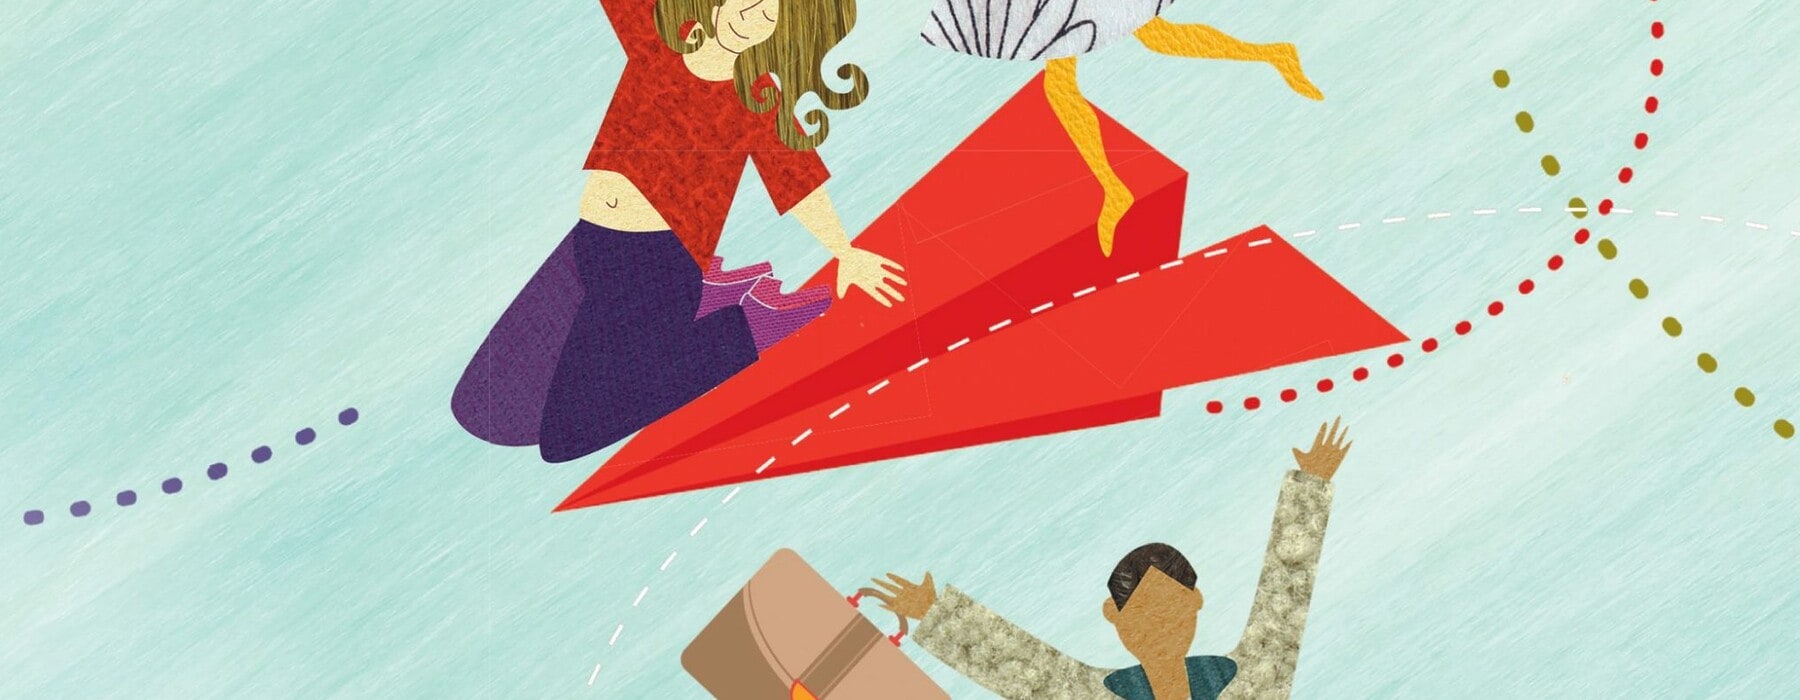 Illustration of women jumping into the air and sitting on a red paper plane